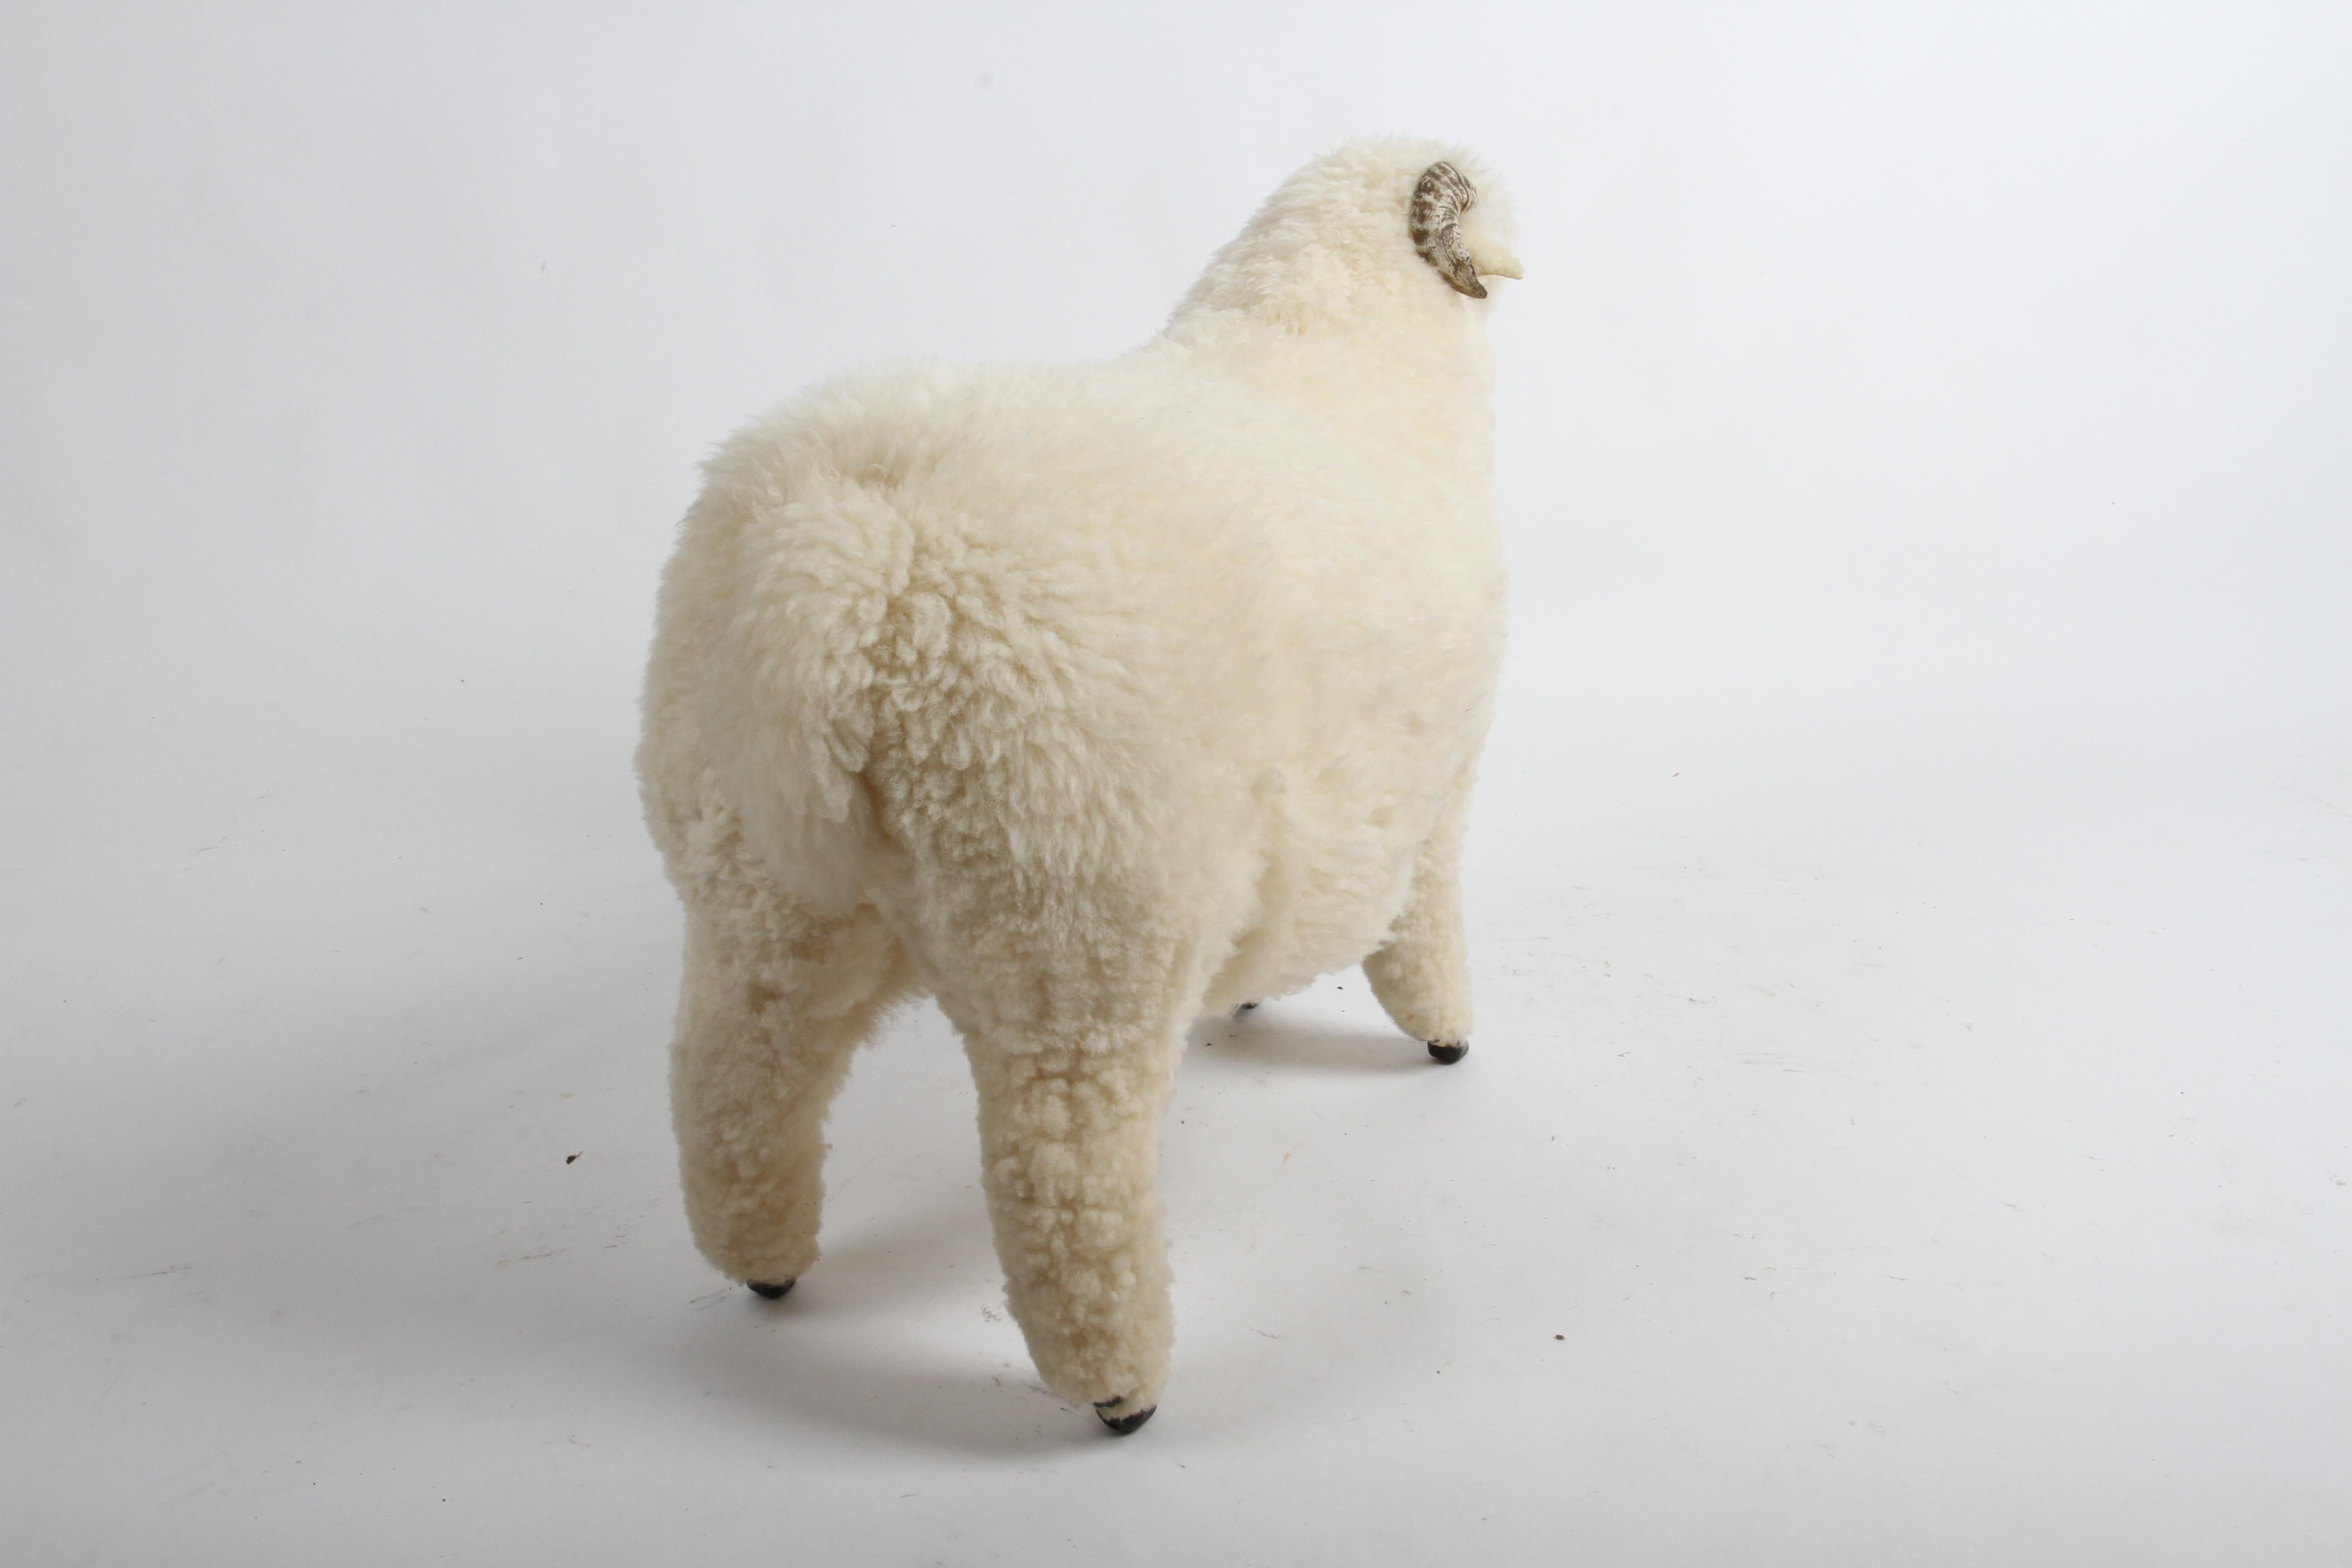 Vintage 1980s Life-Size Sheep Sculpture Ottoman or Footstool by Joel Donahoe For Sale 4